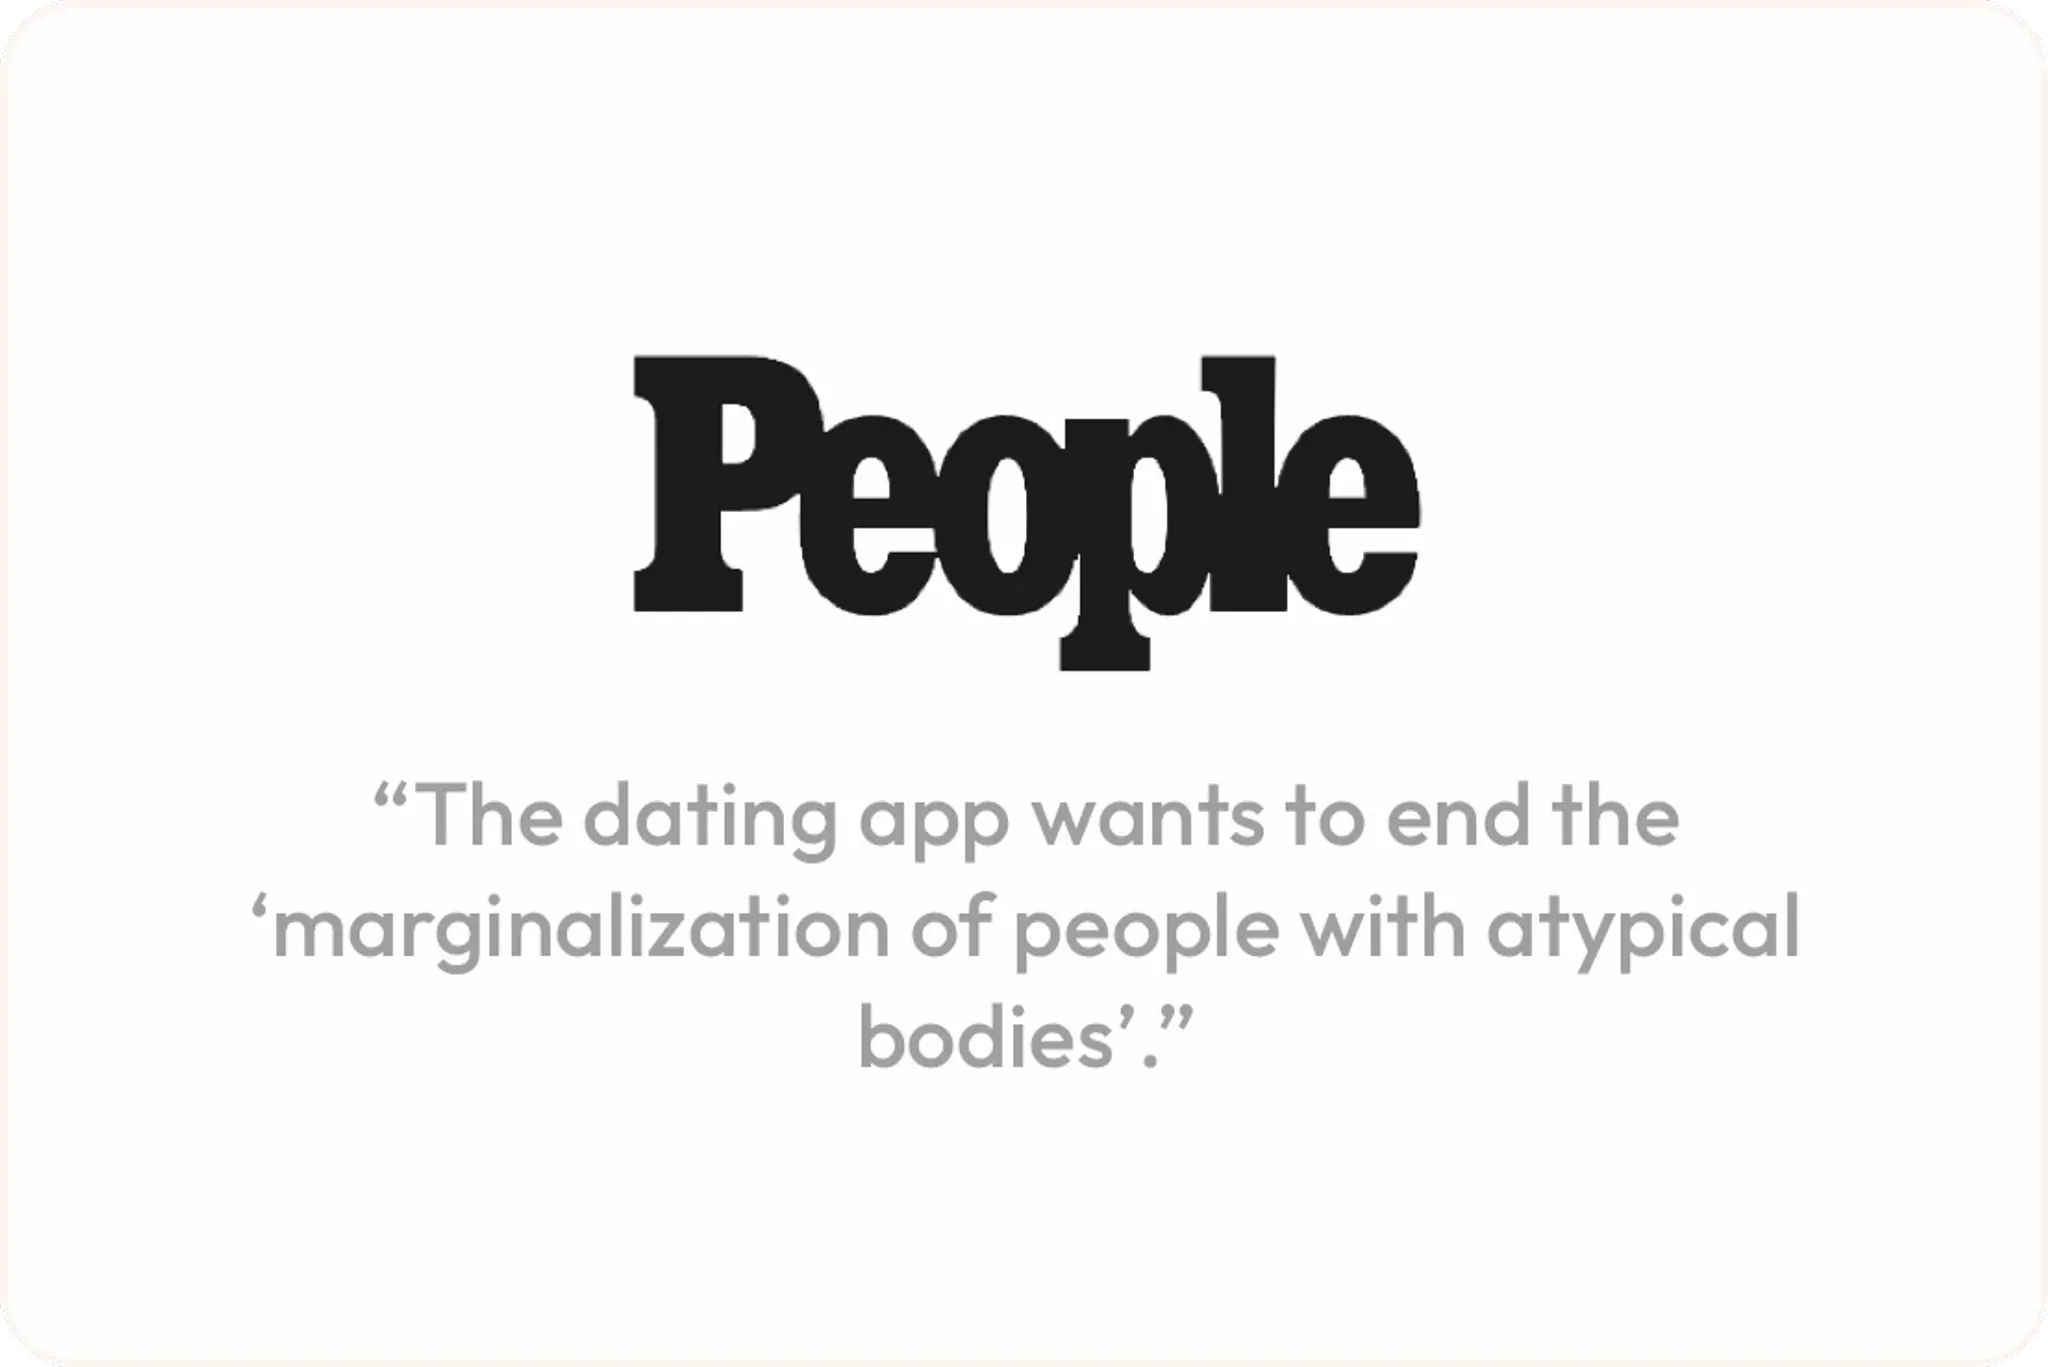 https://people.com/health/wooplus-hopes-to-make-online-dating-better-for-plus-size-women/